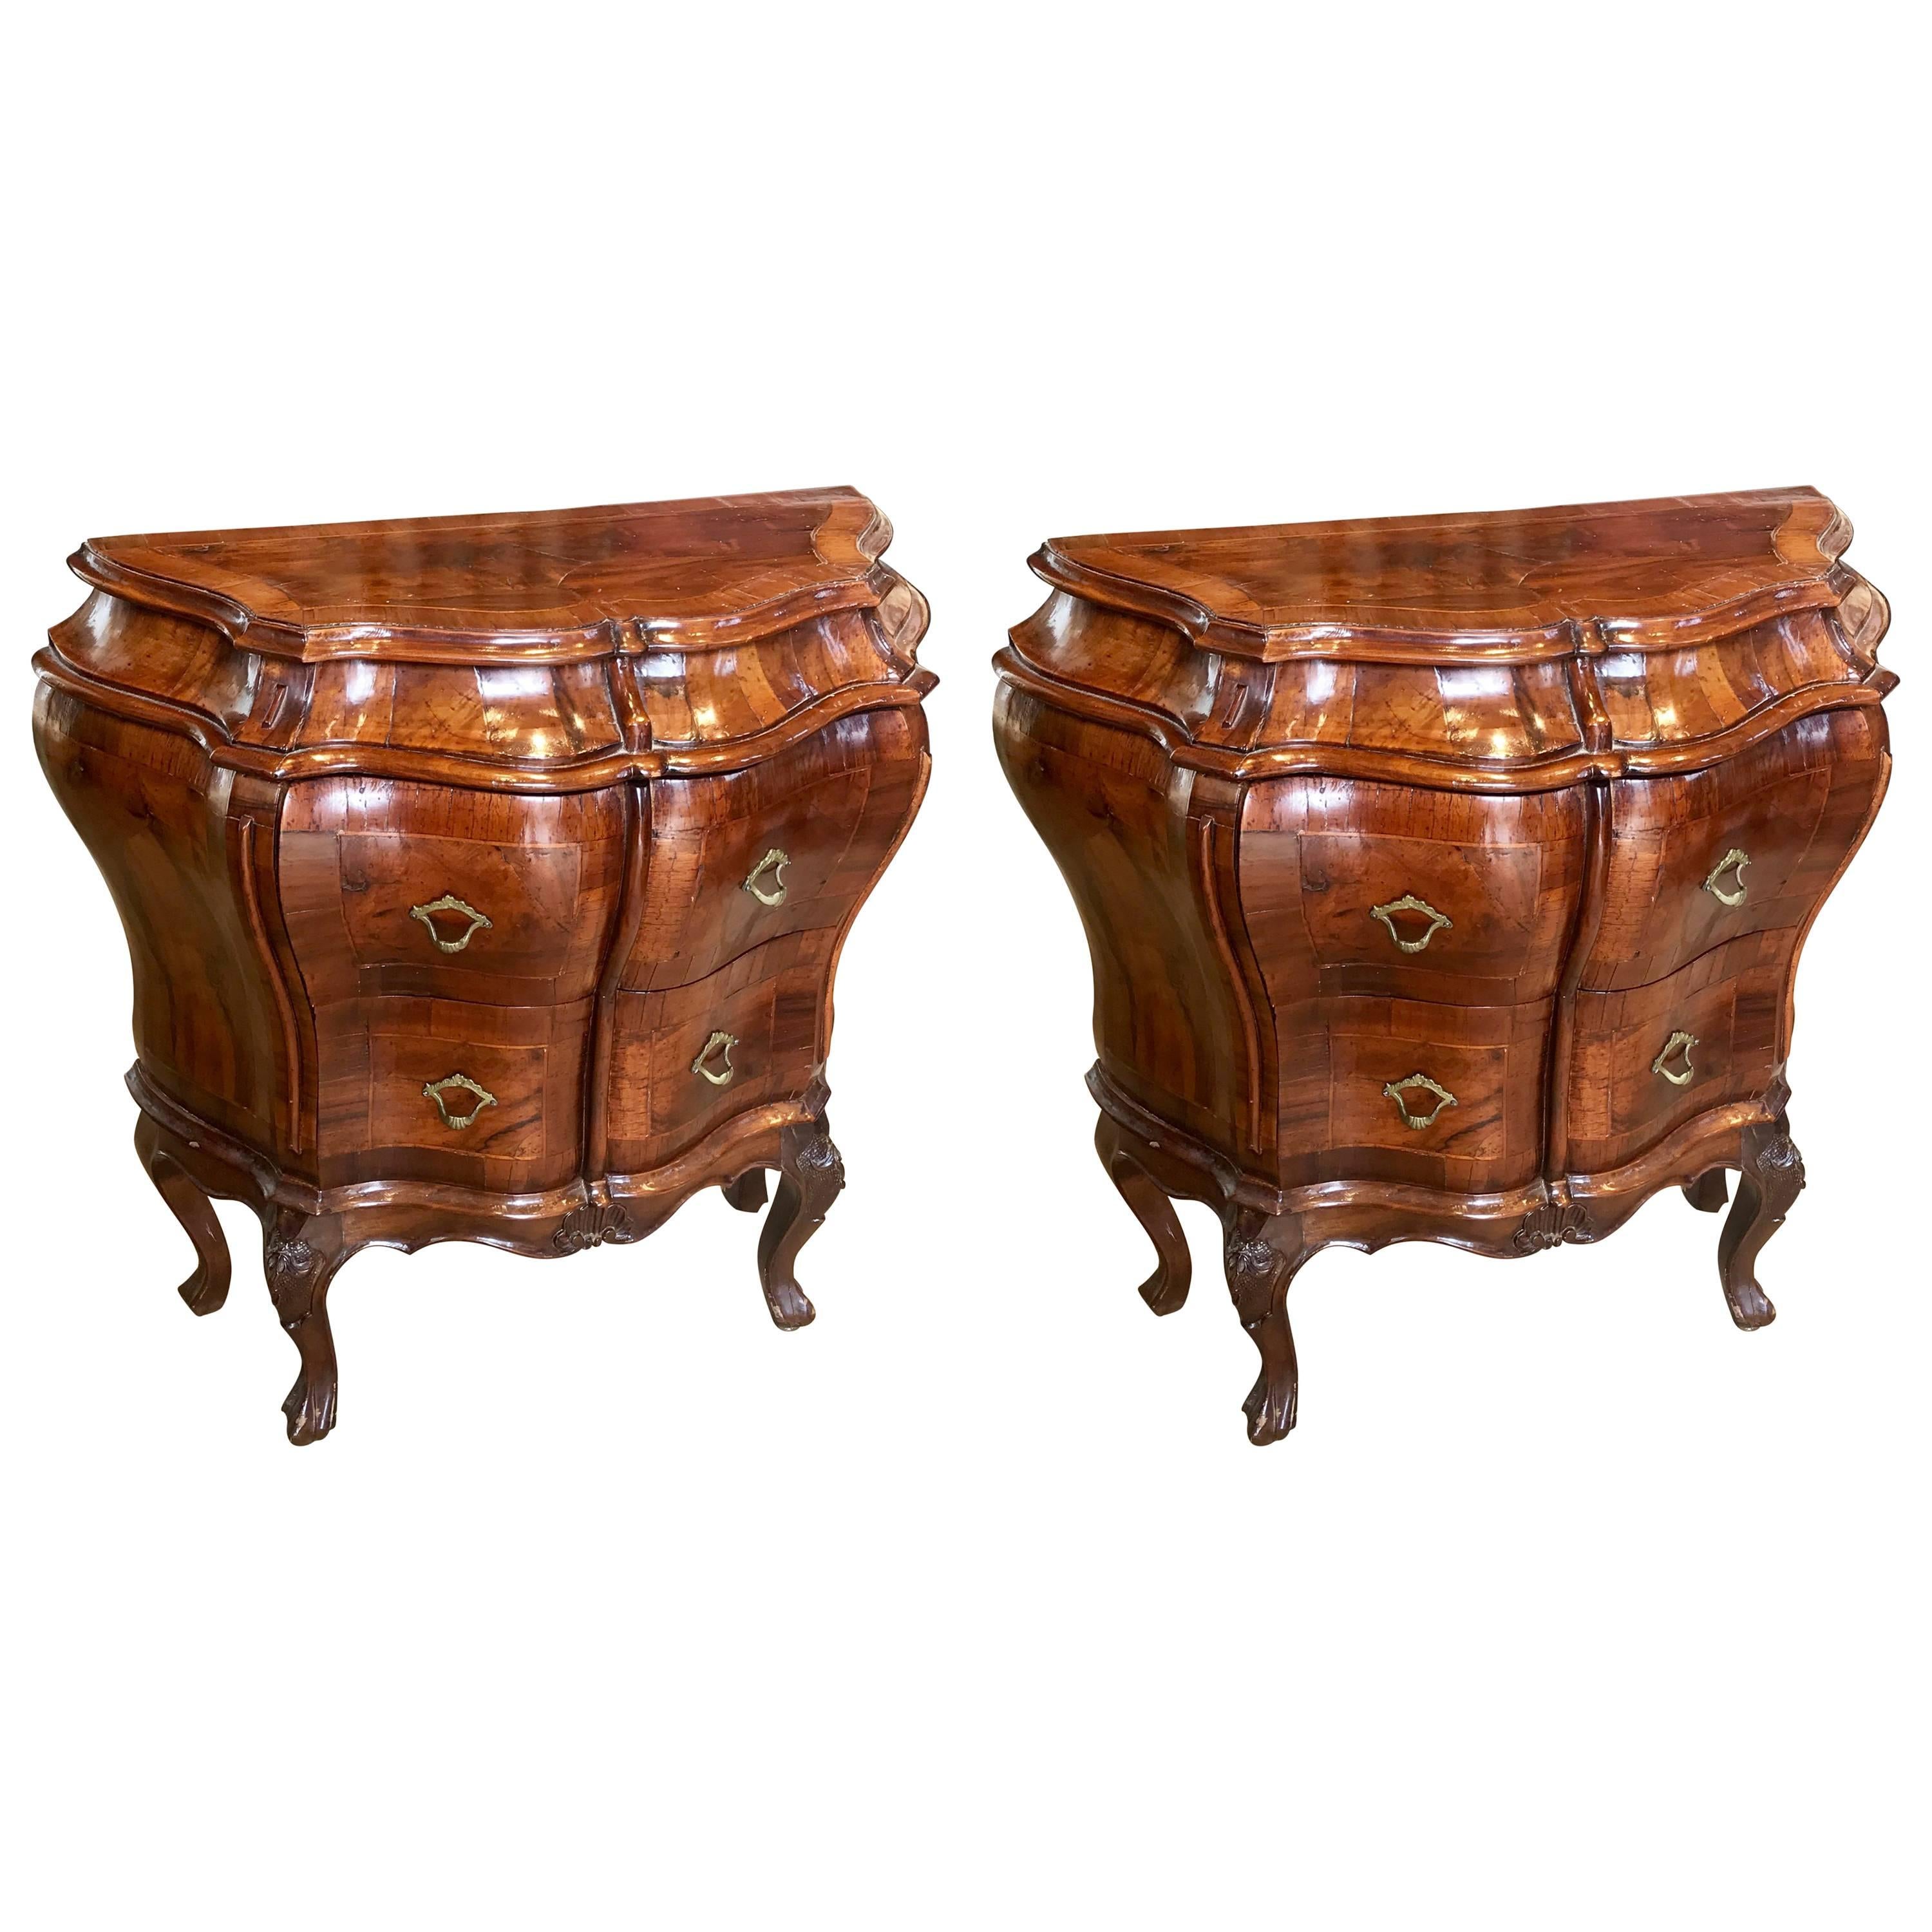 Pair of Late 19th Century Italian Figured Walnut Bedside Commodes